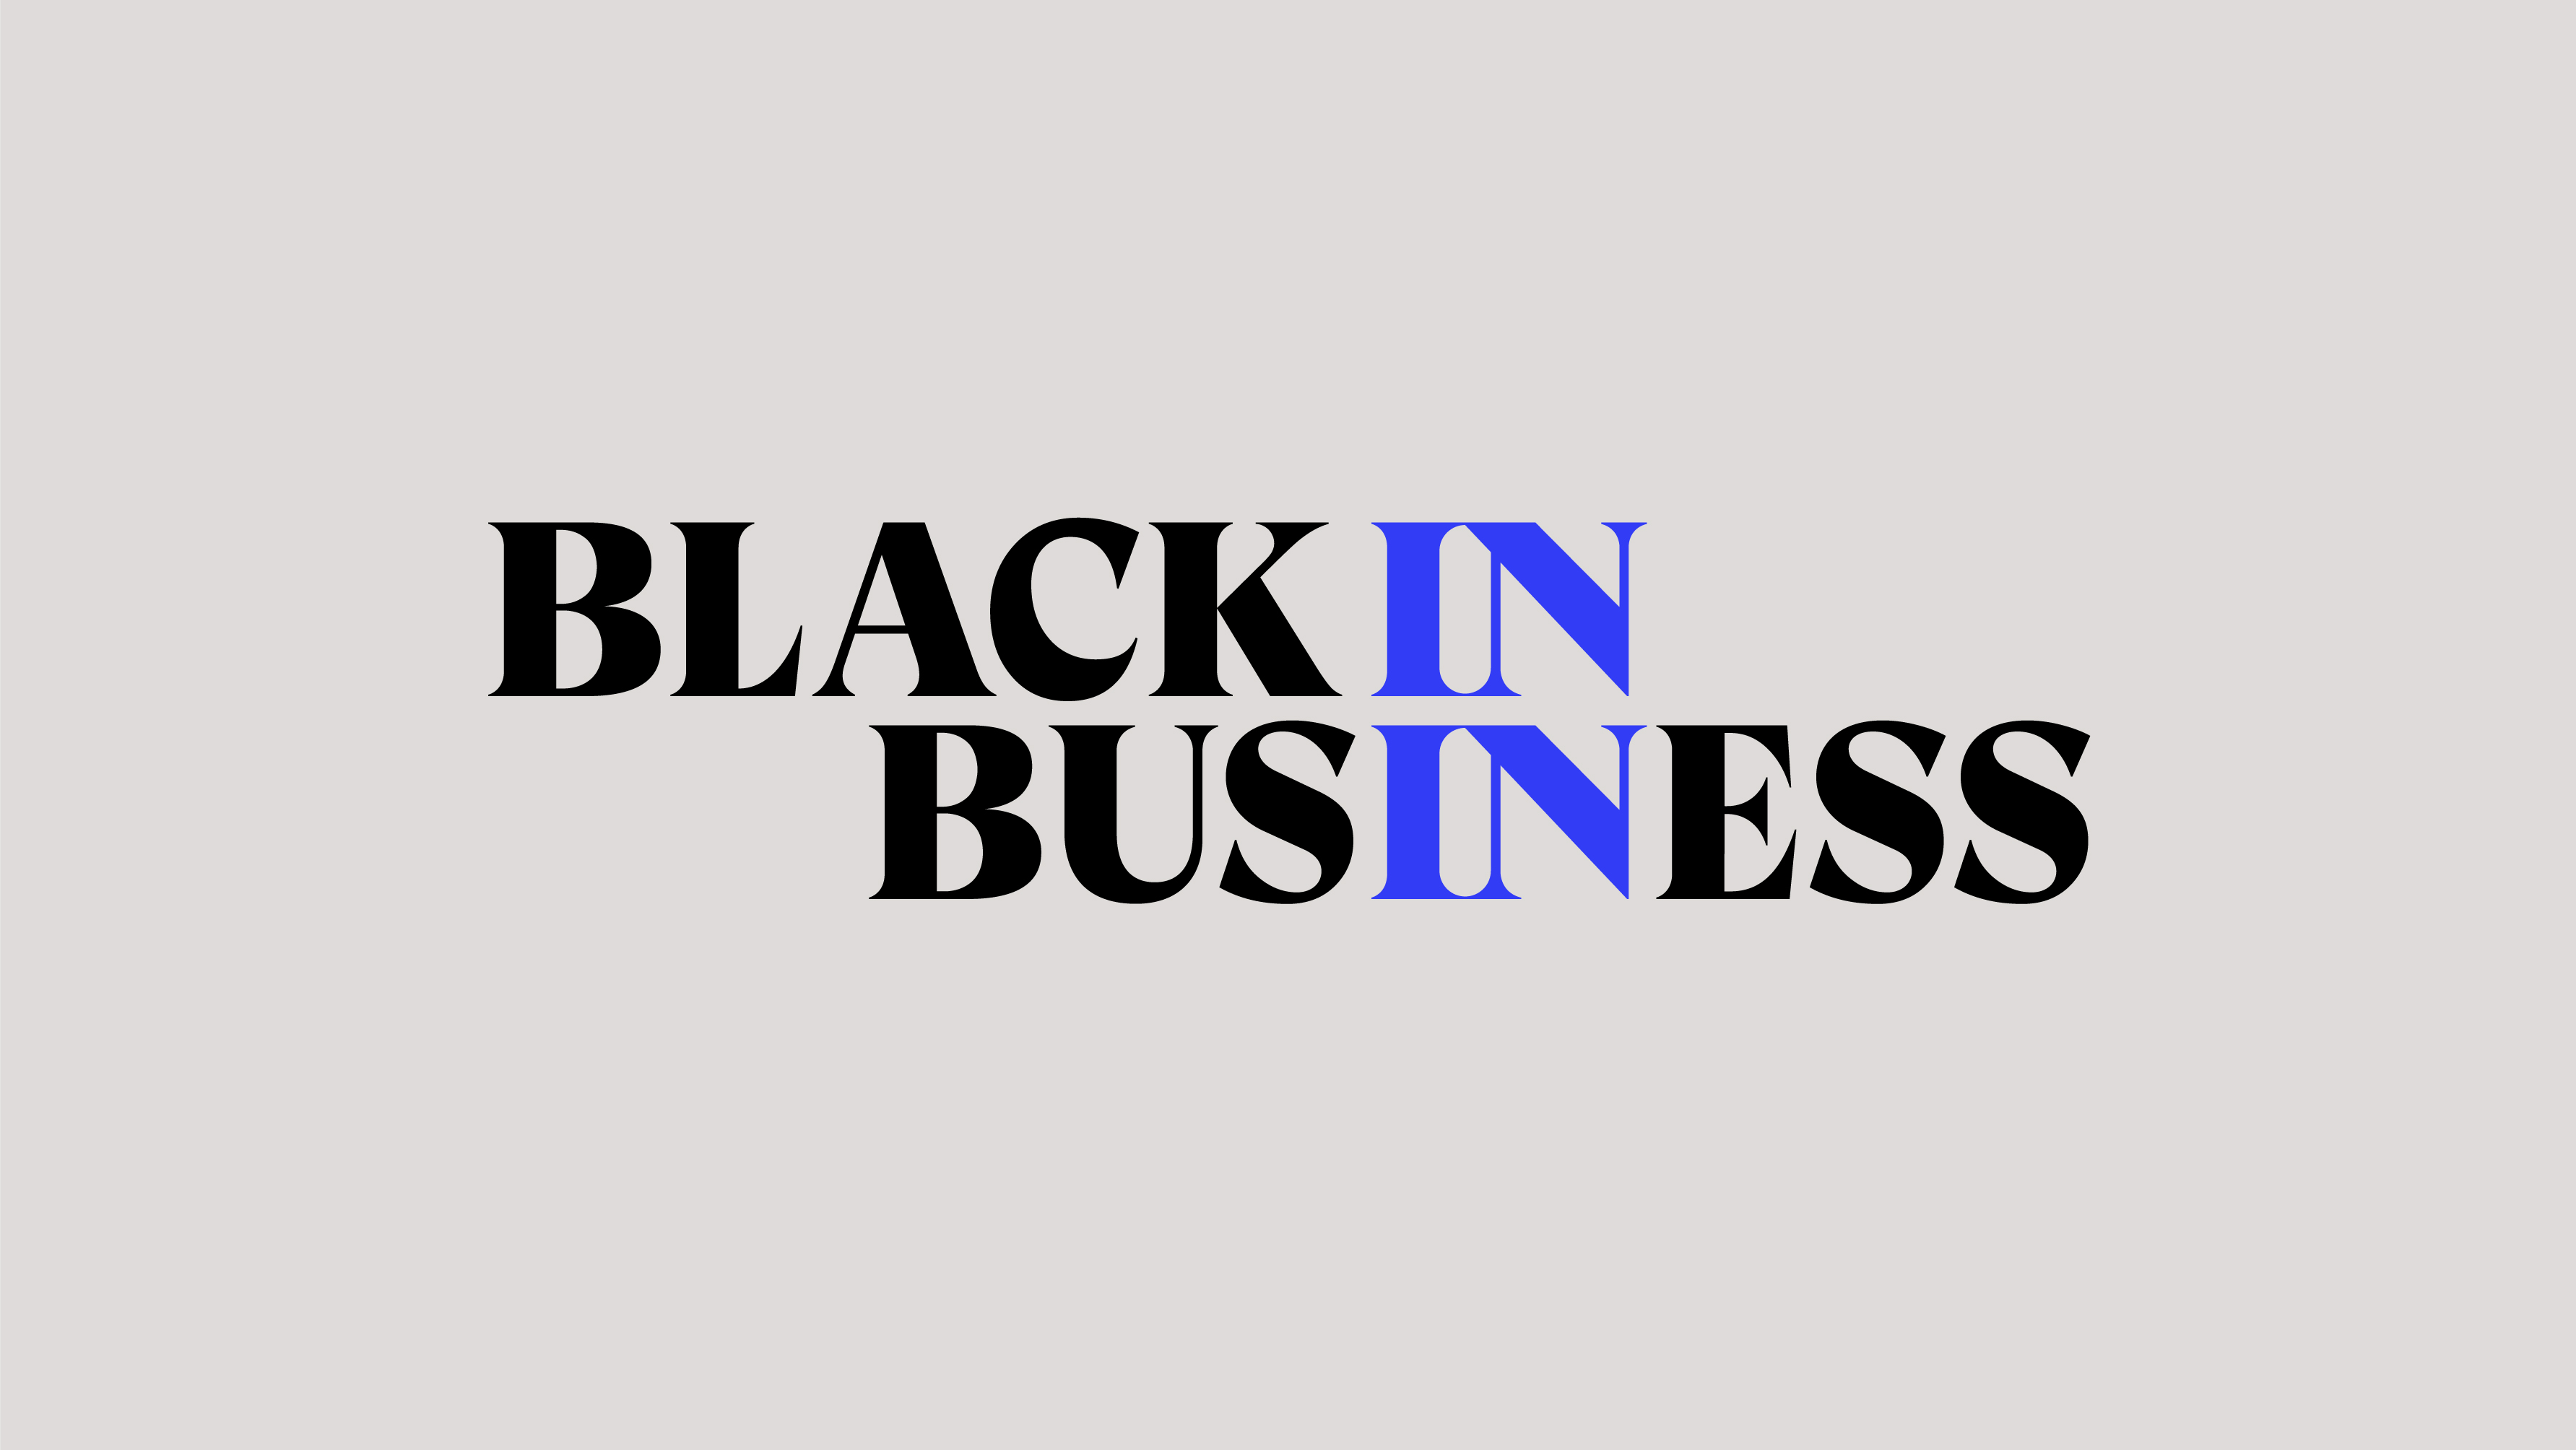 StormBrands Collaborates with London Business School for Black In Business Visual Identity